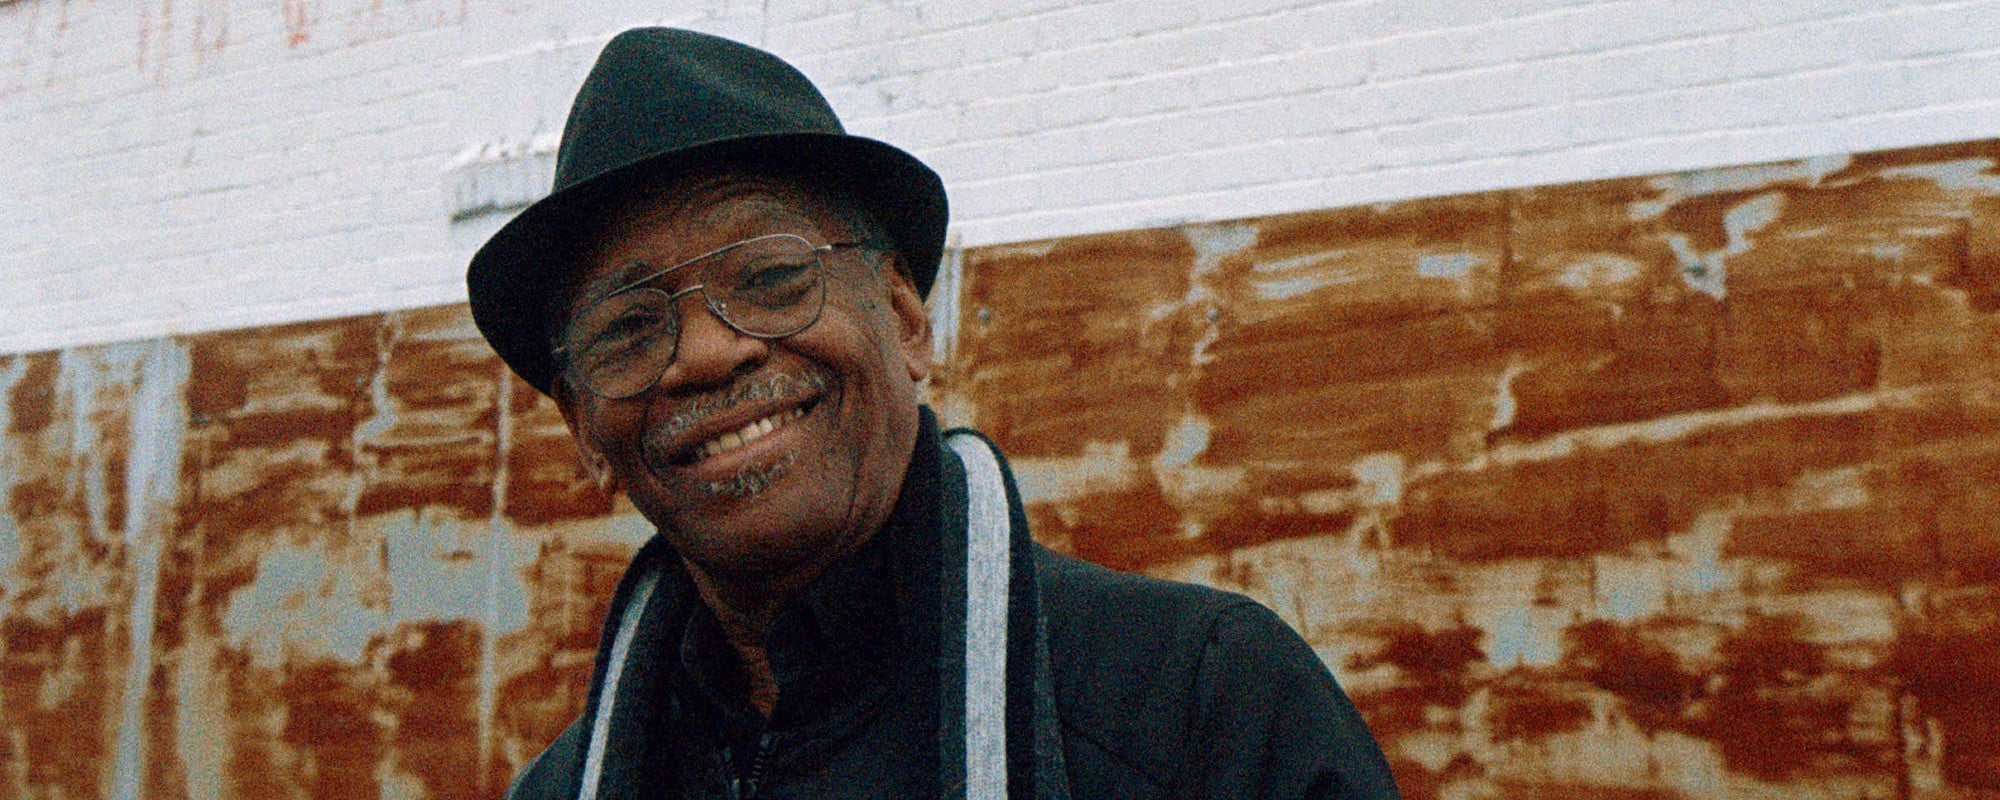 Don Bryant Talks Love, New Music and His First Grammy Nomination at 78 years old